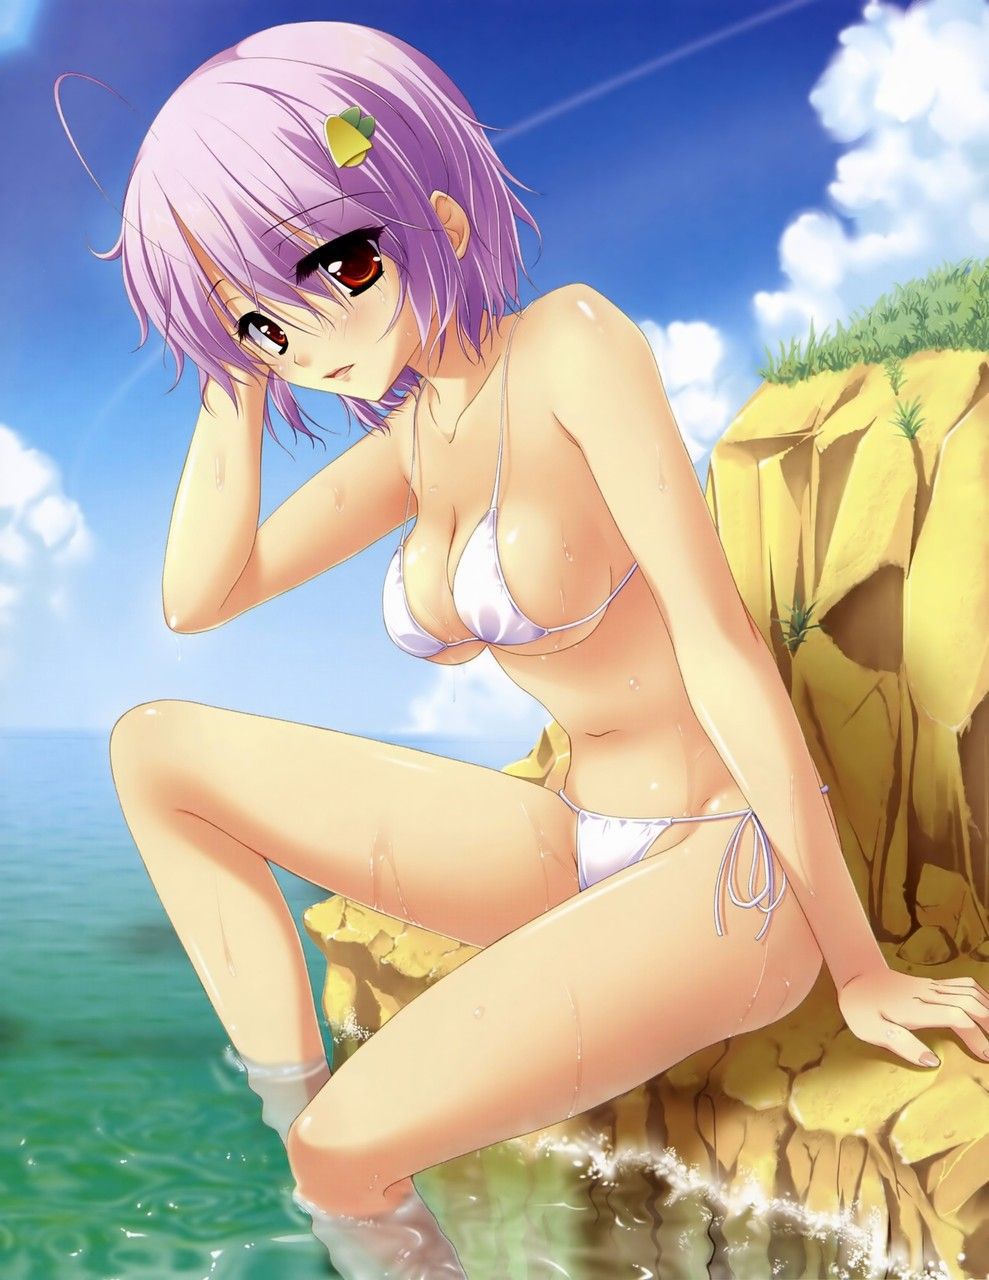 Secondary swimsuit image even on cold days 20